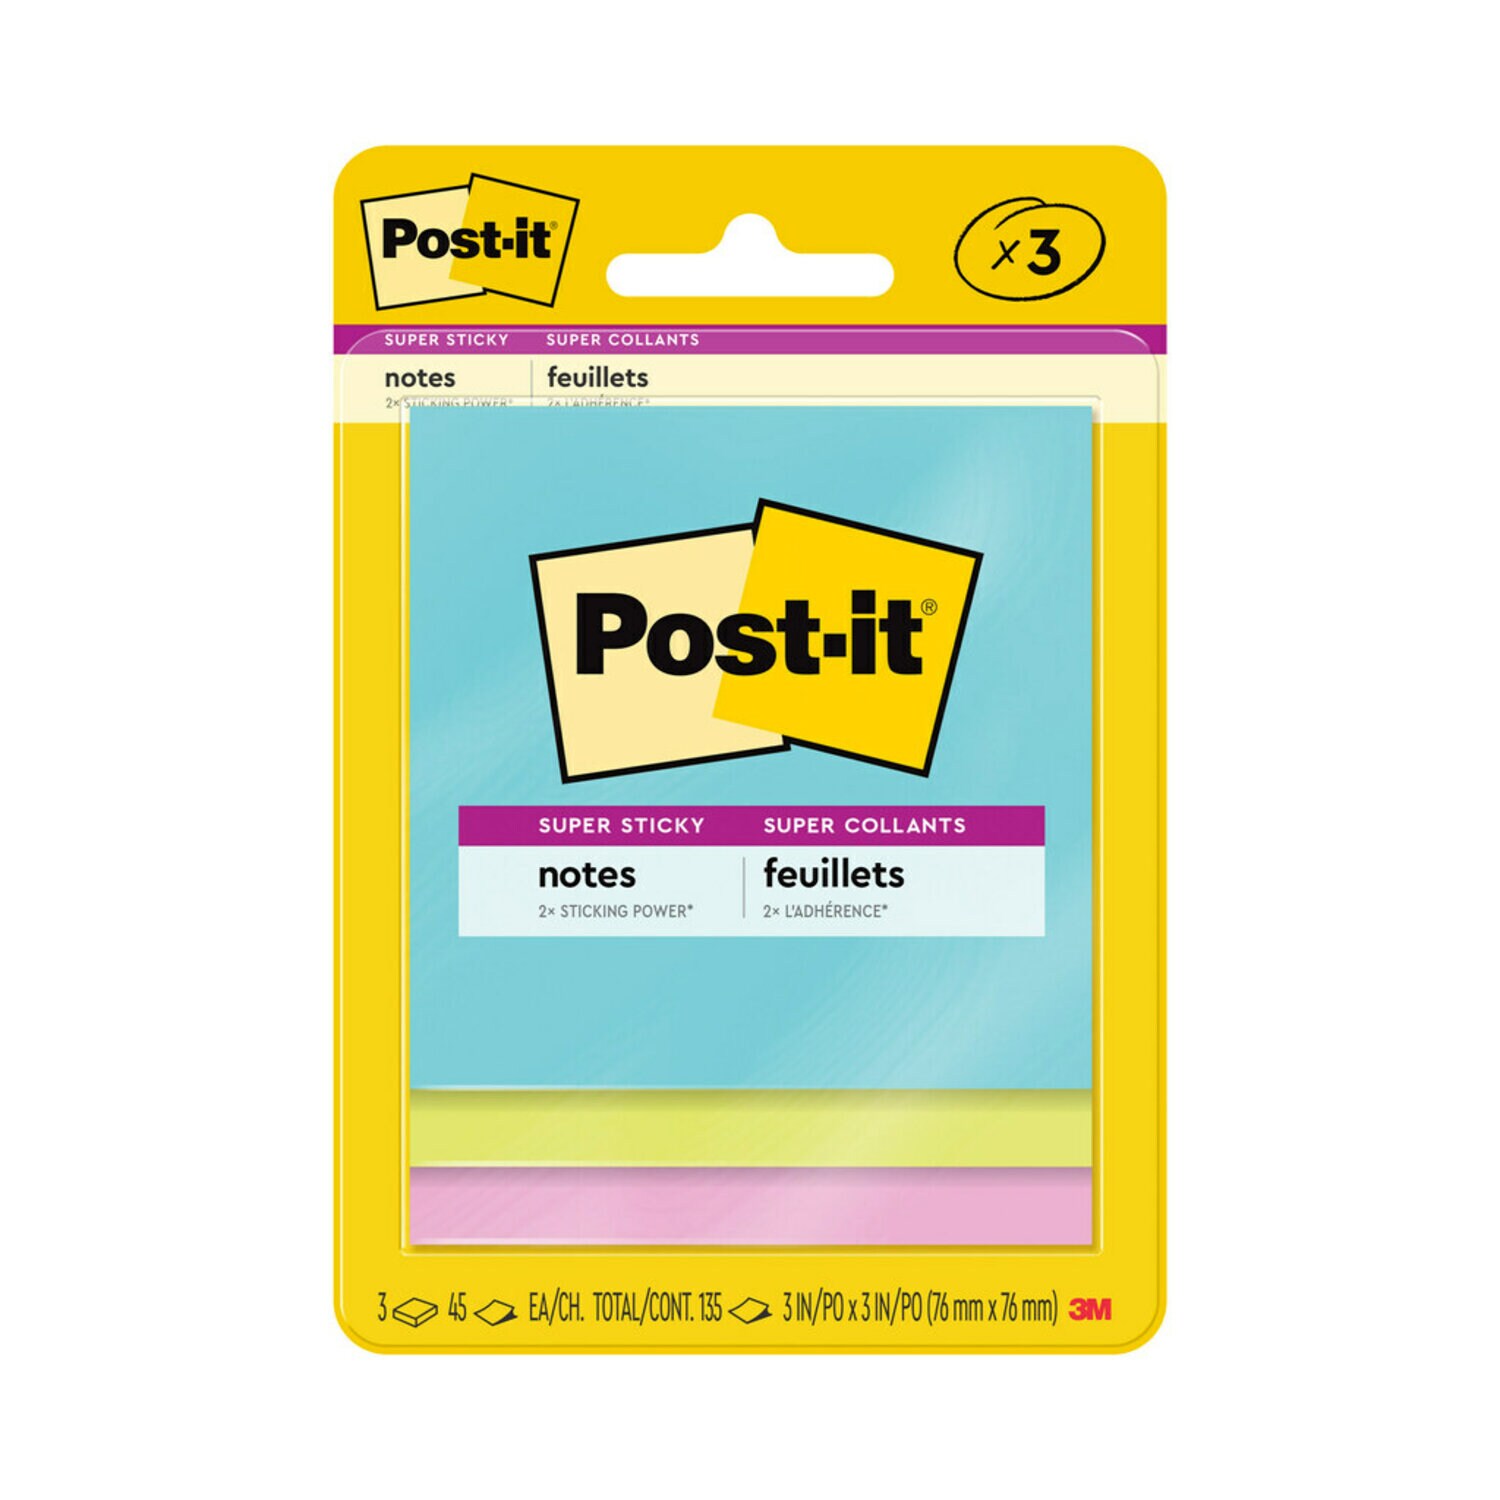 7100089126 - Post-it Super Sticky Notes 3321-SSMIA, 3 in x 3 in (76 mm x 76 mm),
Miami Collection, 3 Pads/Pack, 45 Sheets/Pad